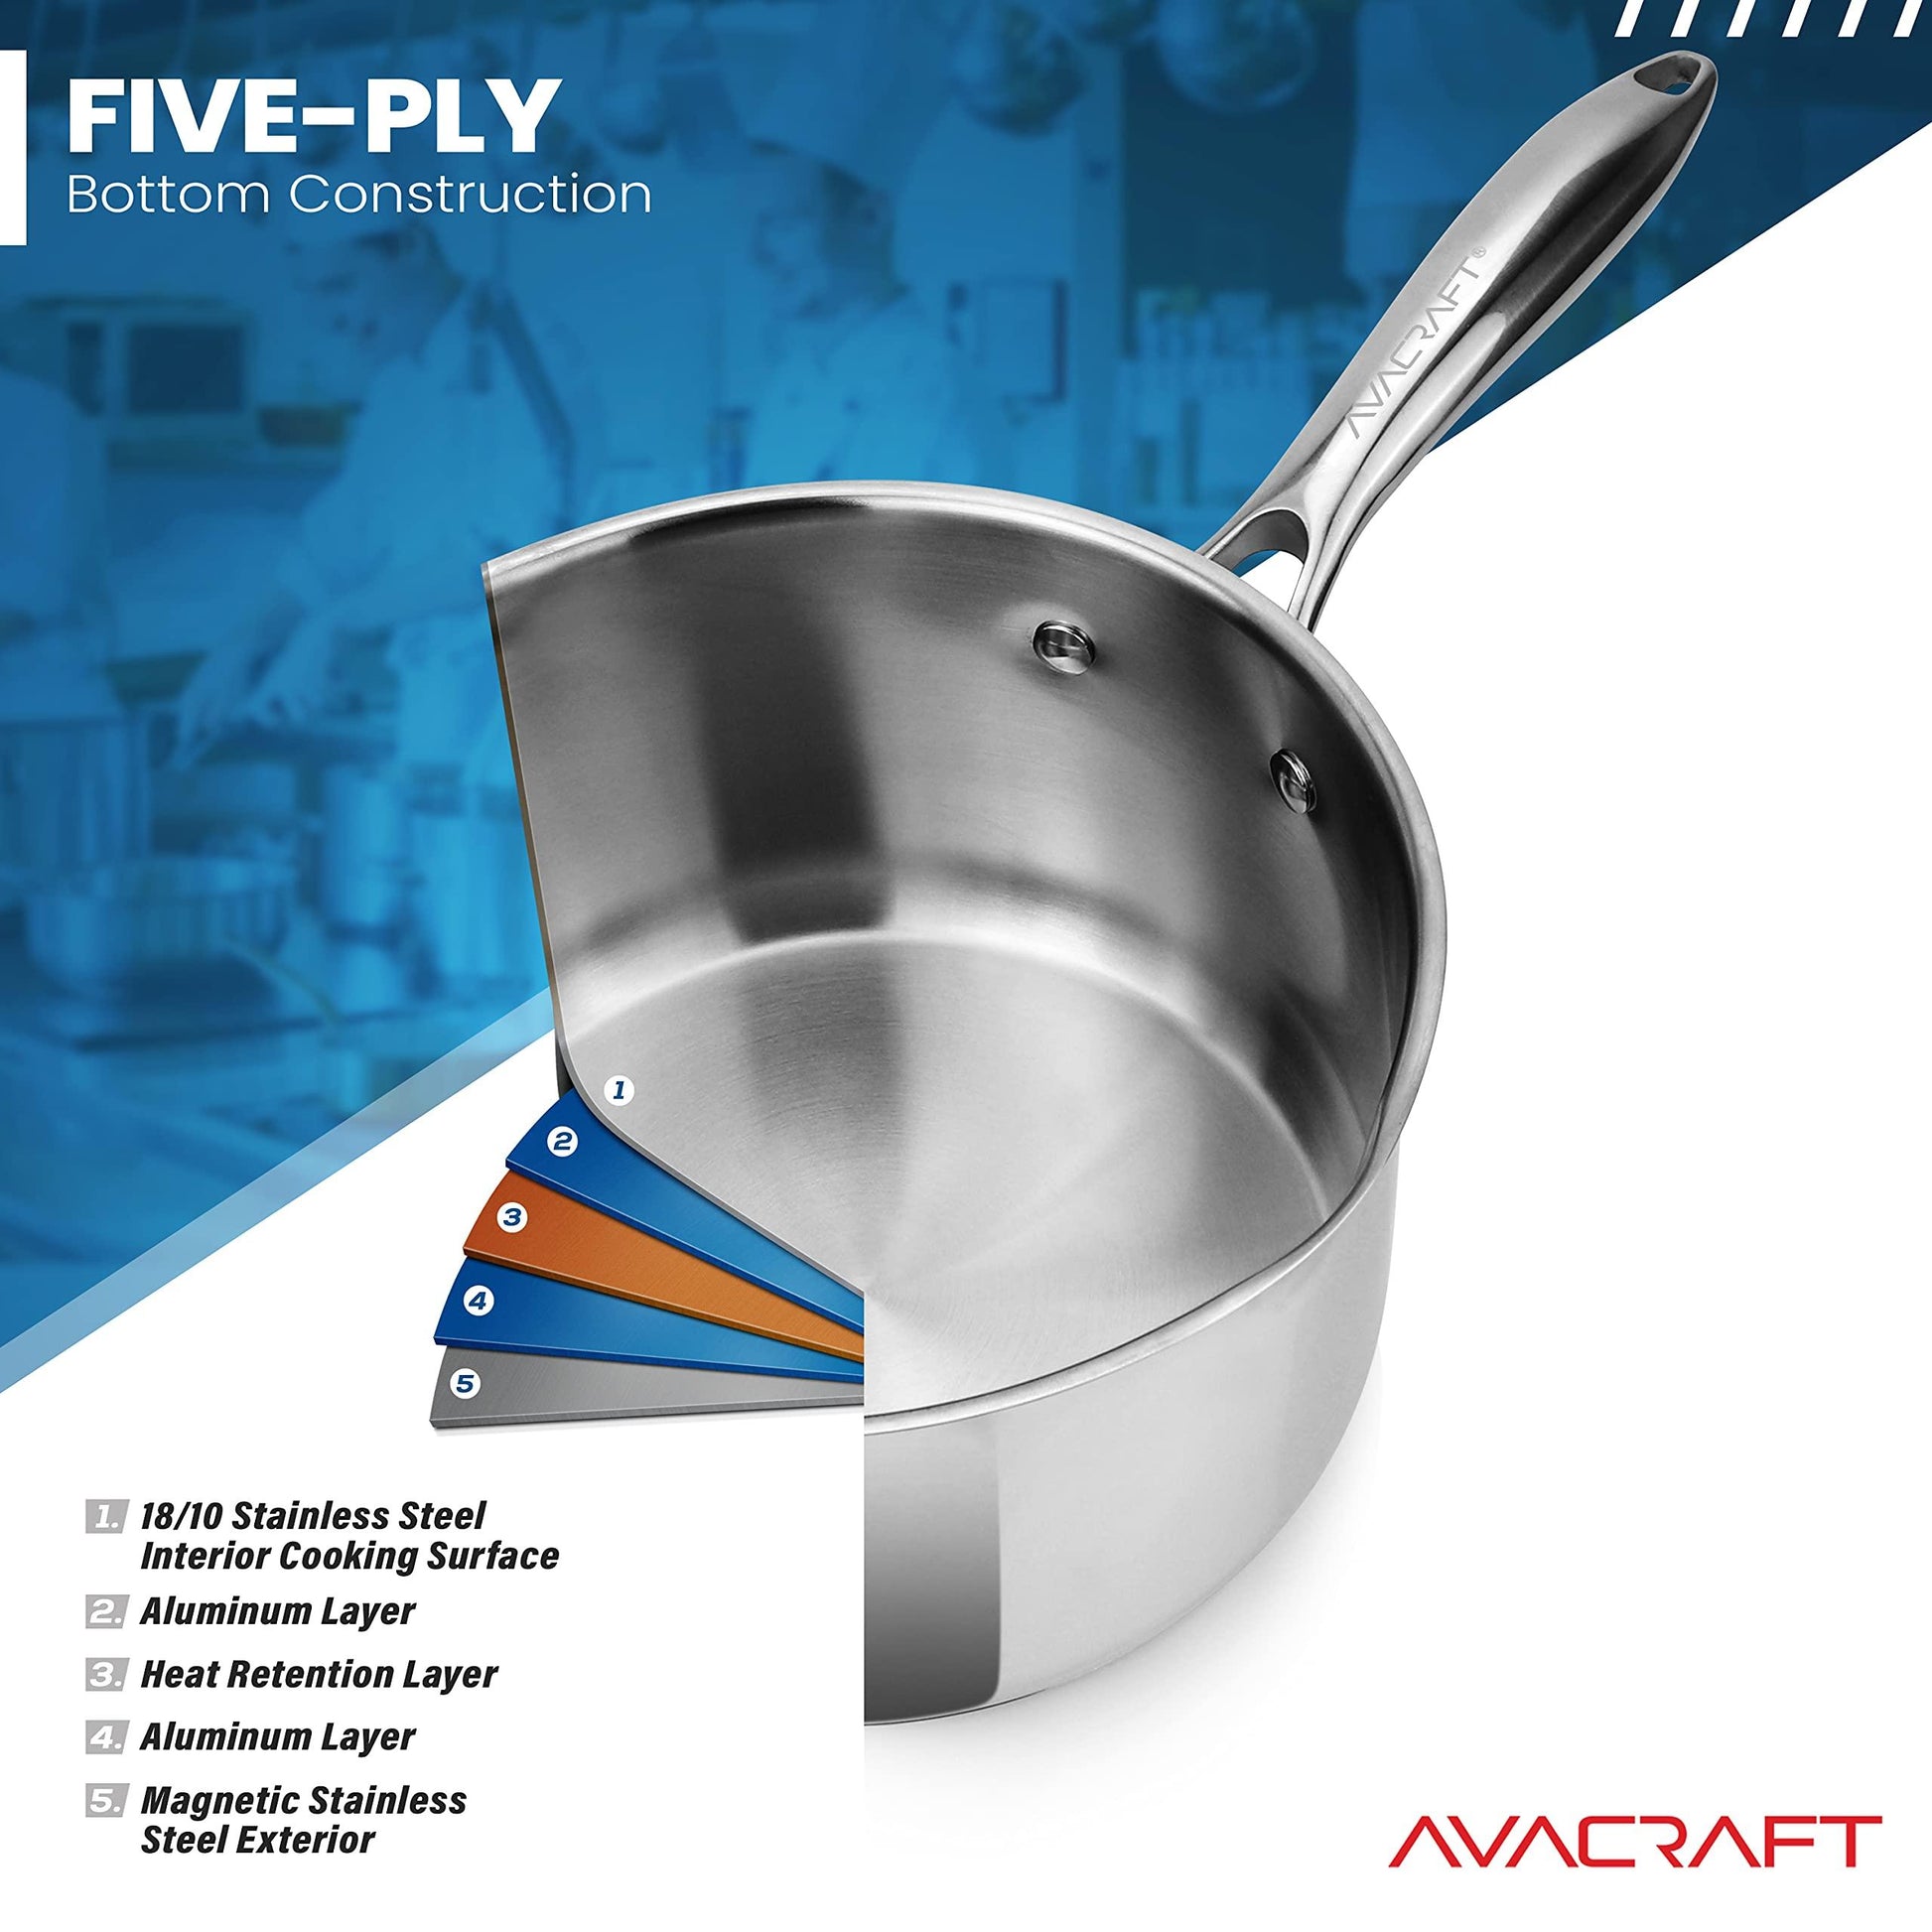 AVACRAFT Stainless Steel Saucepan with Glass Strainer Lid, Two Side Spouts for Easy Pour with Ergonomic Handle, Multipurpose Sauce Pot (Tri-Ply Capsule Bottom, 2.5 Quart) - CookCave